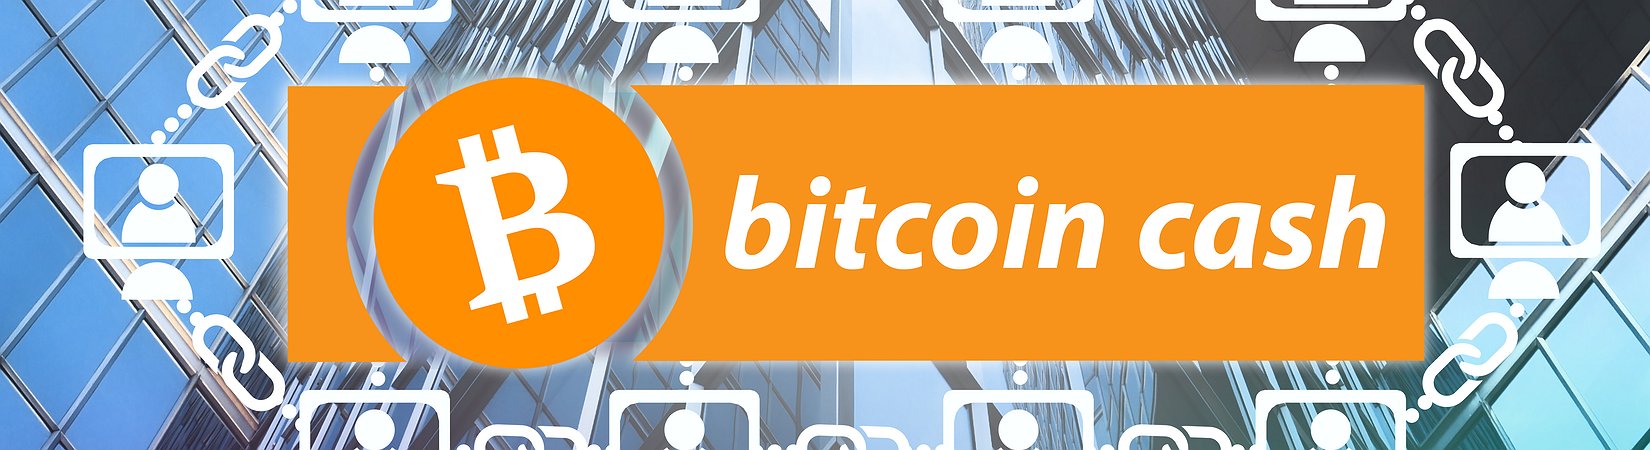 Team Bitcoin How To Collect Bitcoin Cash On Electrum - 